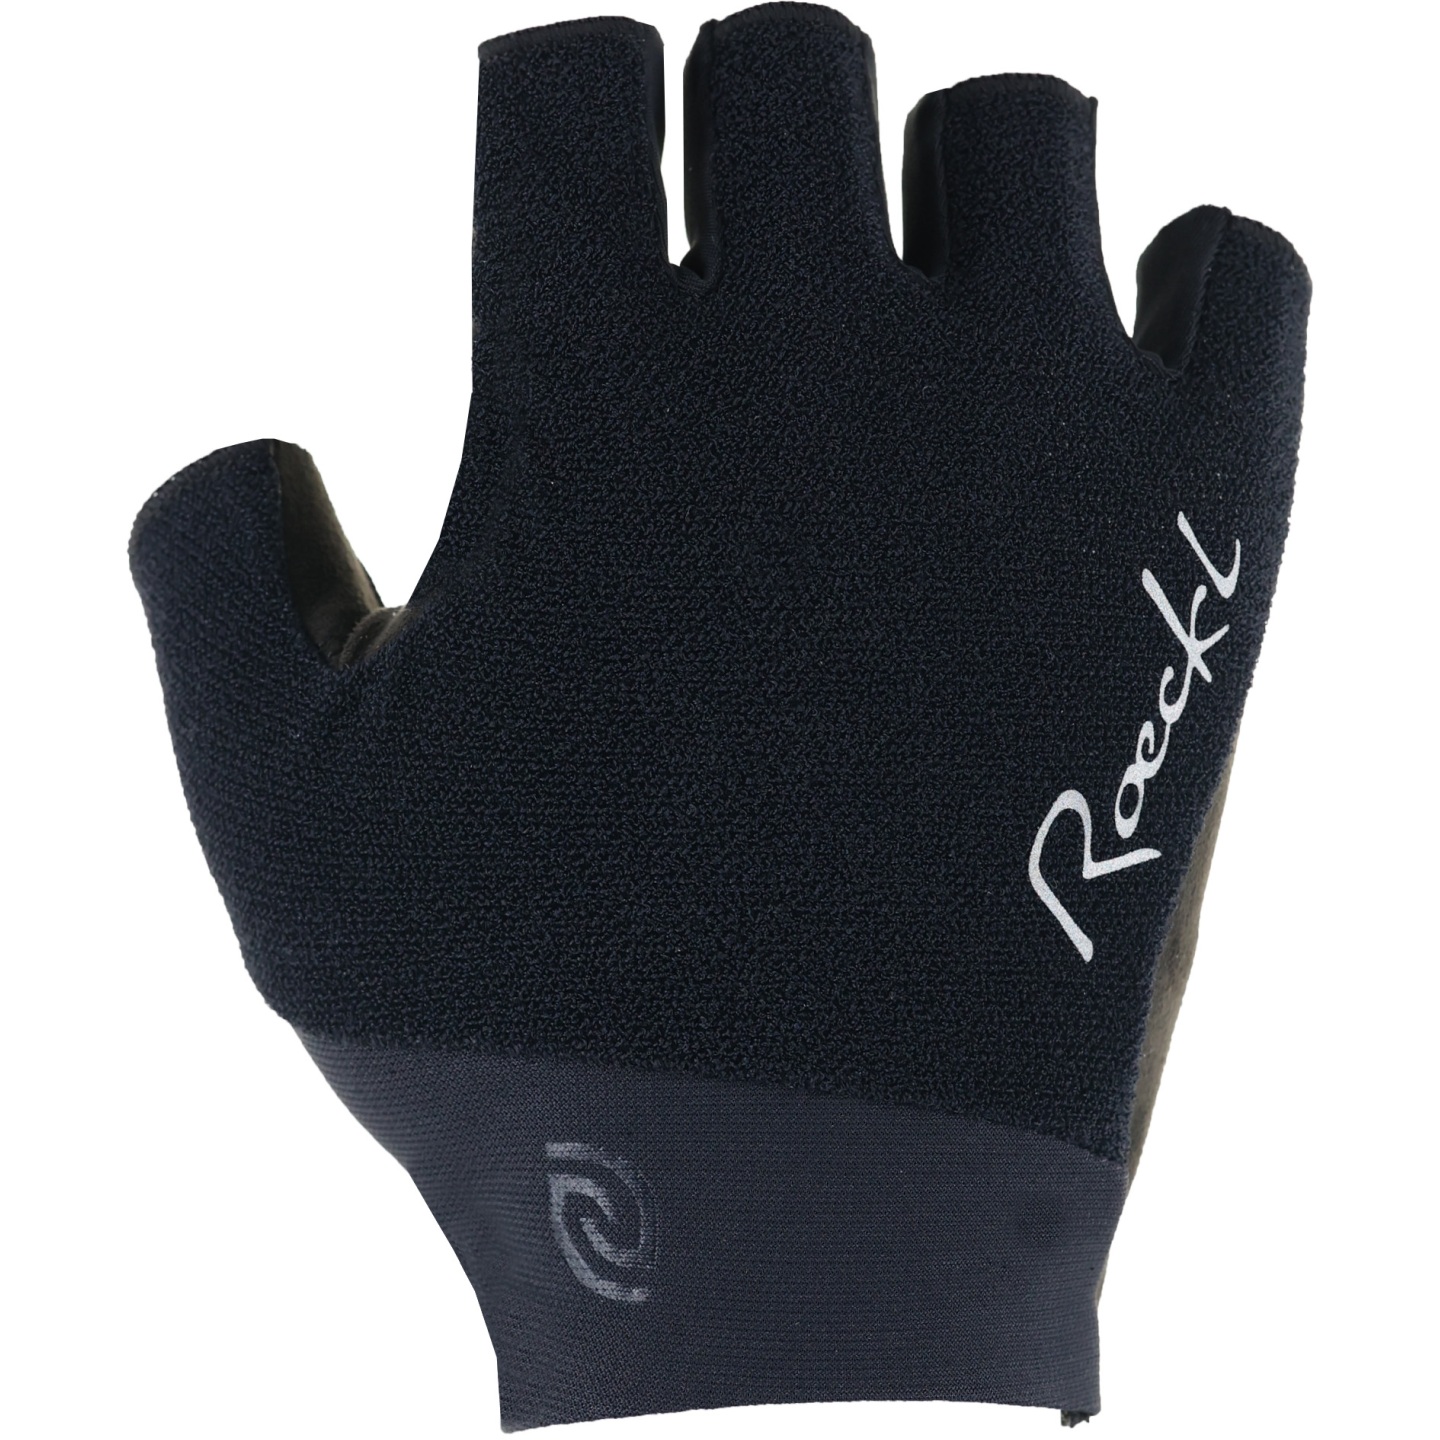 Picture of Roeckl Sports Deleni Cycling Gloves Women - black 9000